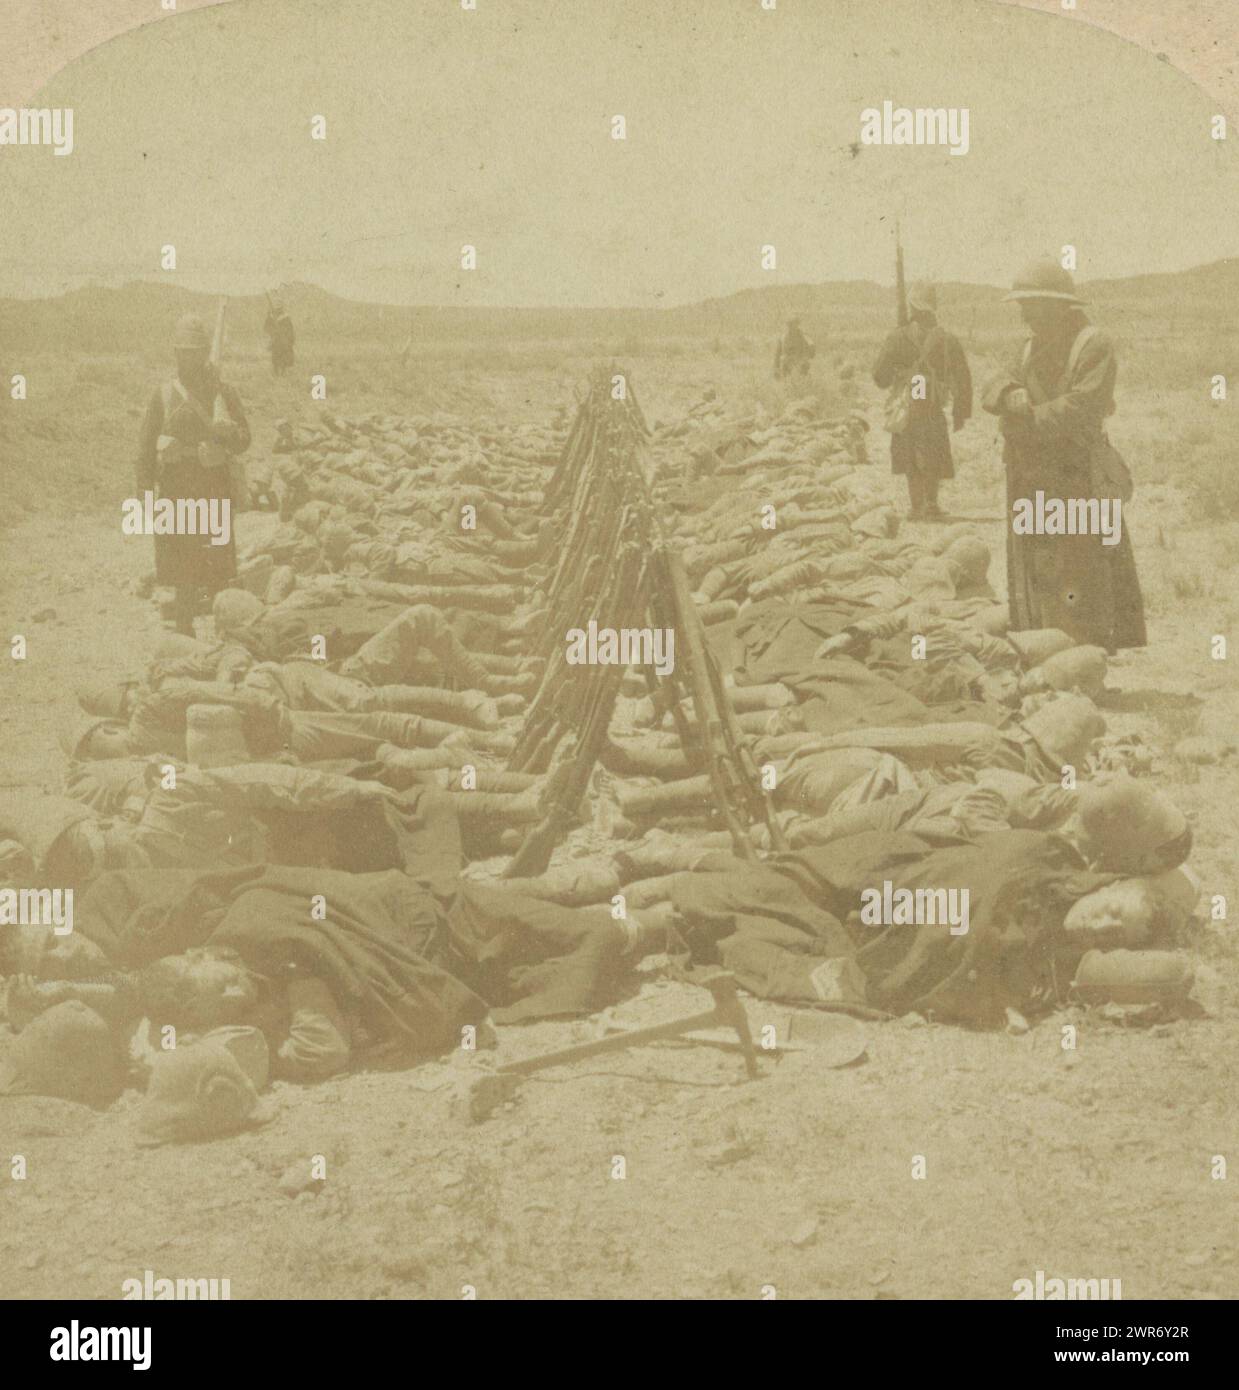 British soldiers sleep next to their guns near Colesberg, South Africa, 'When the Cannon's roar is still'-sleeping by their Arms (Dec. 30th) before Colesberg, South Africa (title on object), anonymous, publisher: Underwood and Underwood, Colesberg, publisher: New York (city), (possibly), 1900, cardboard, albumen print, height 88 mm × width 178 mm, stereograph Stock Photo